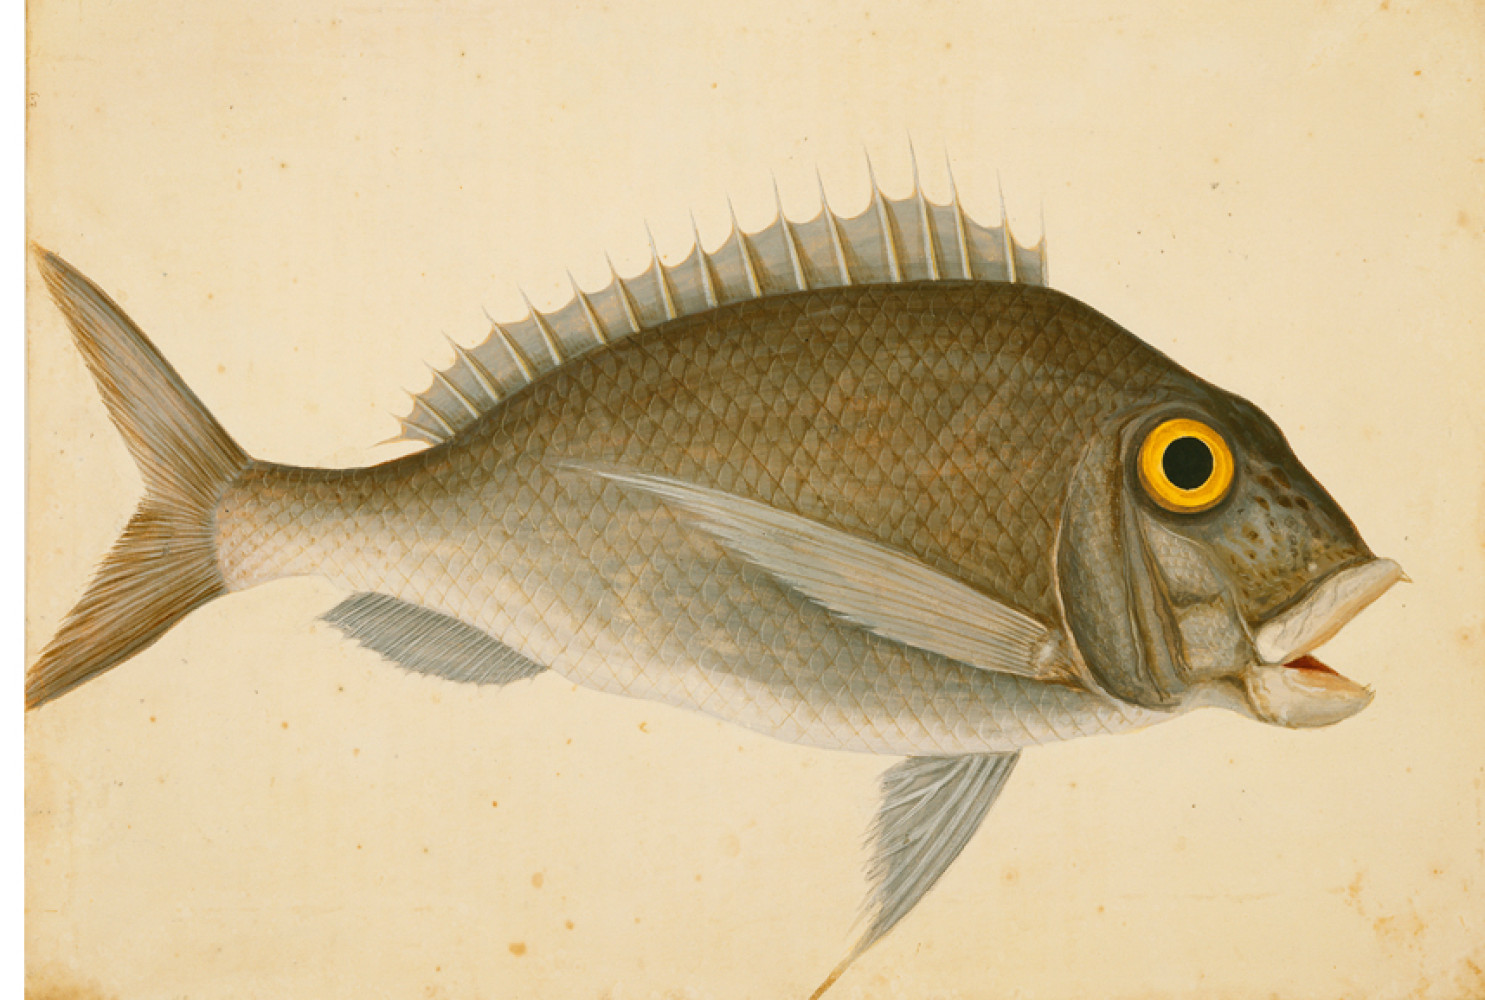 The Porgy, ca. 1722-1726 
By Mark Catesby (British, 1682-1749); watercolor and bodycolor; 22 1/2 x 29 1/2 inches (framed); Lent by Her Majesty Queen Elizabeth II
